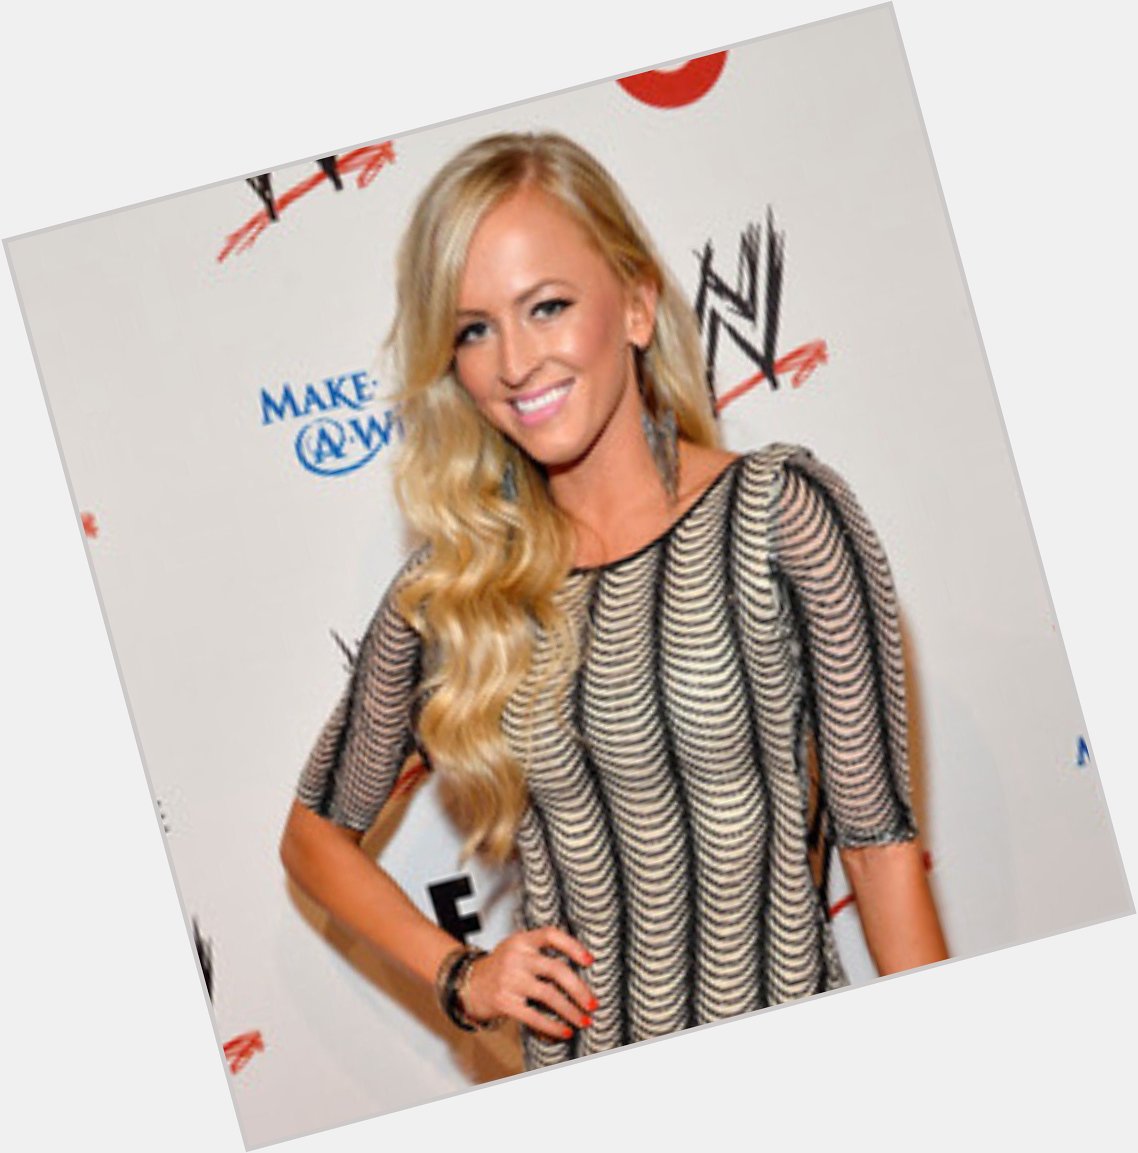 Summer Rae\s Birthday is on Sep. 28th, so Happy B-Day Danielle Moinet! Sorry that I was a day late! 